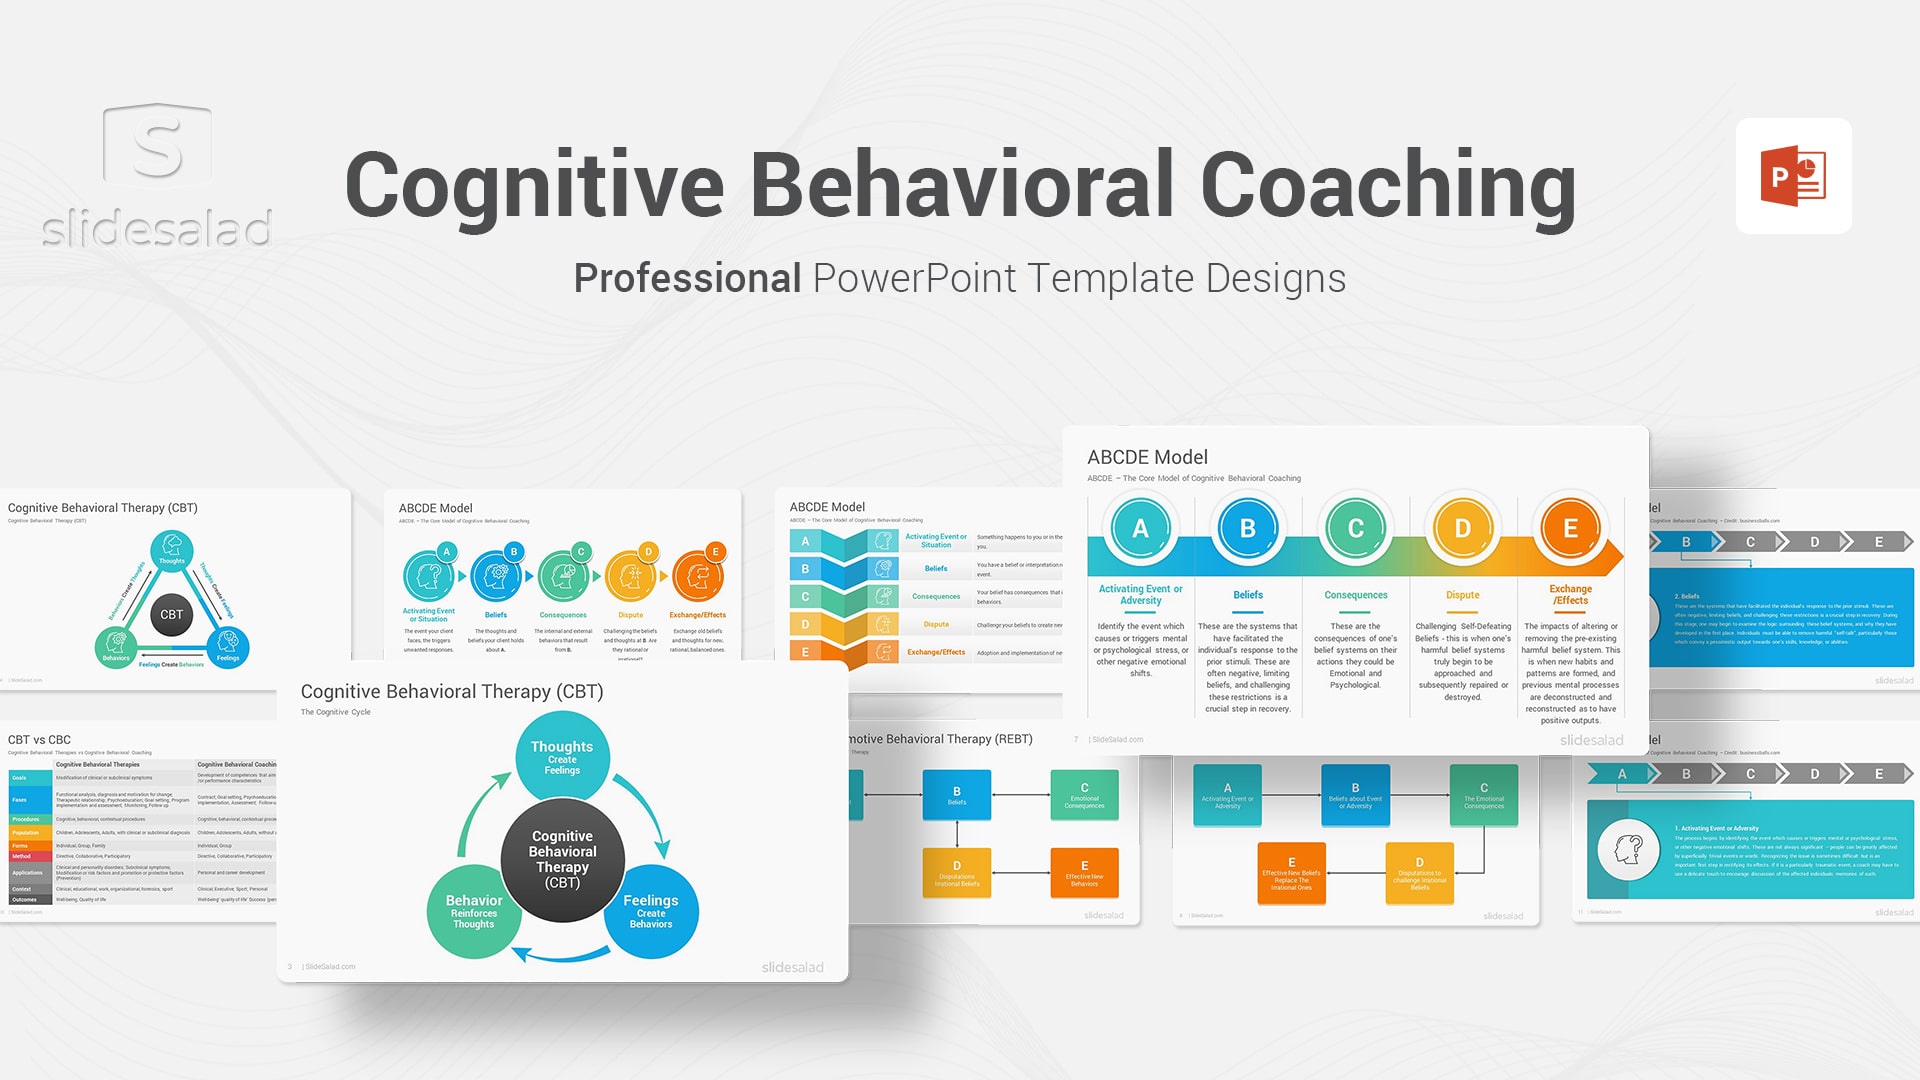 Cognitive Behavioral Coaching PowerPoint Template